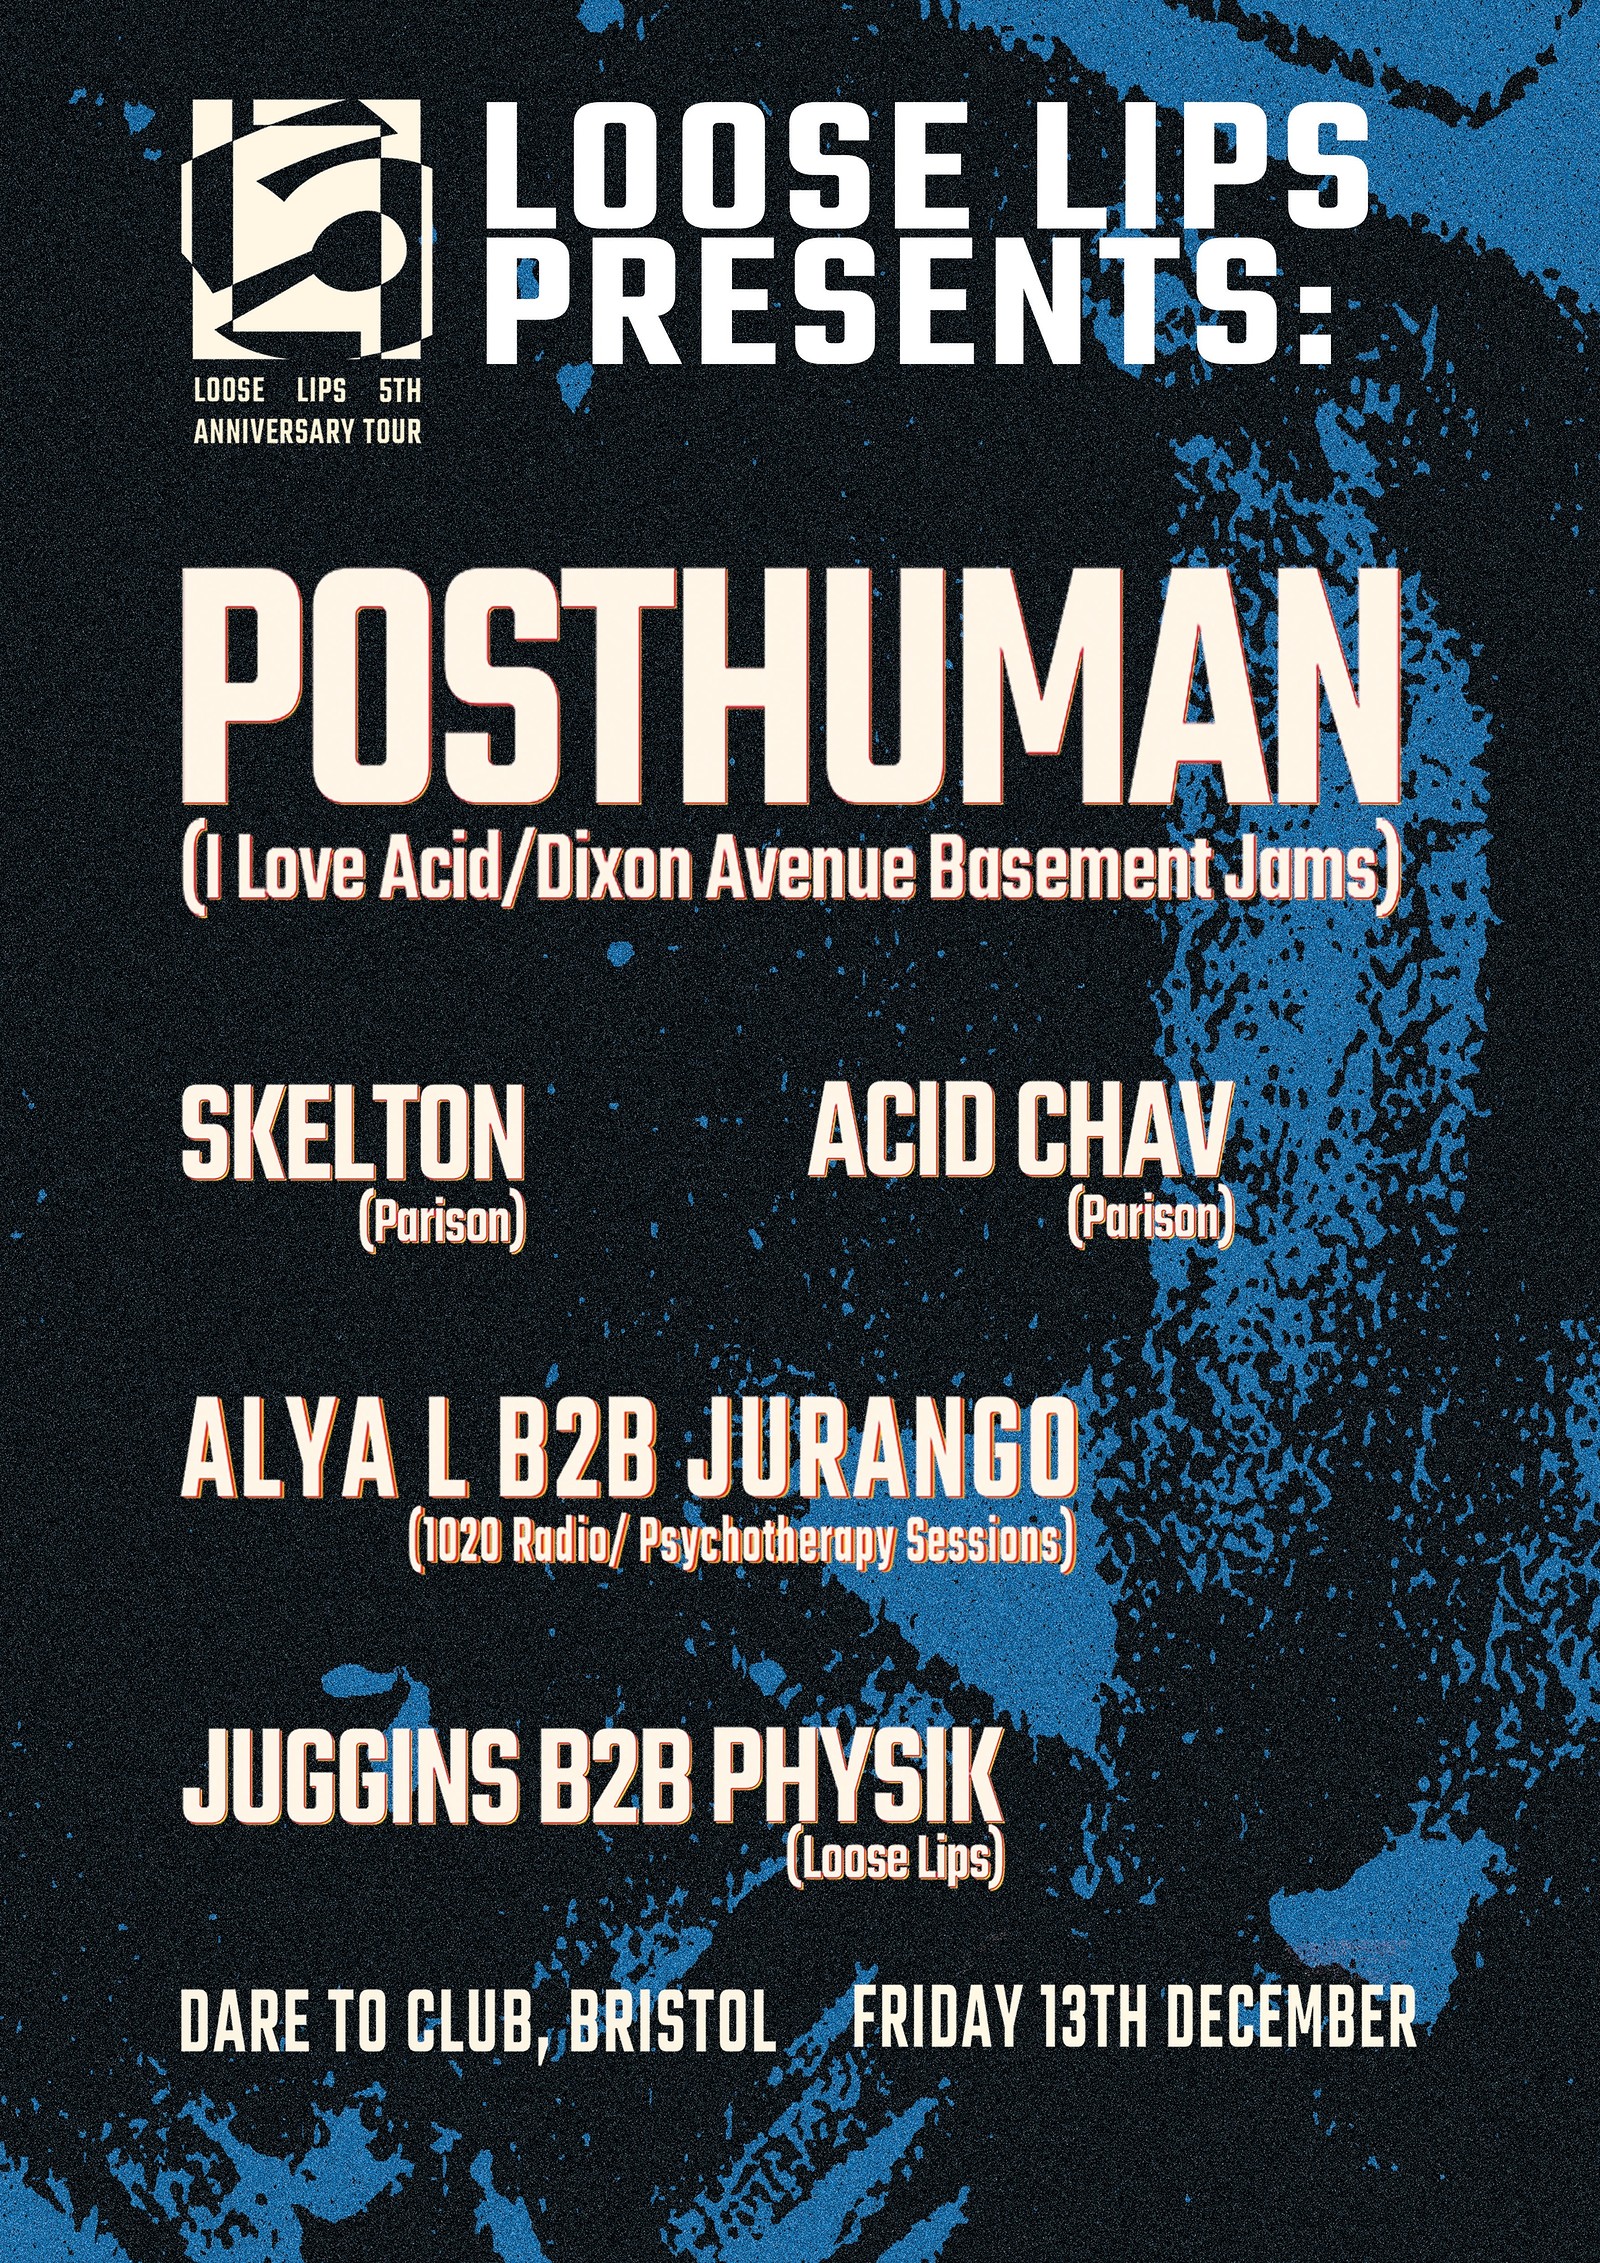 Loose Lips Xmas Party w/ Posthuman + Parison + PTS at Dare to Club